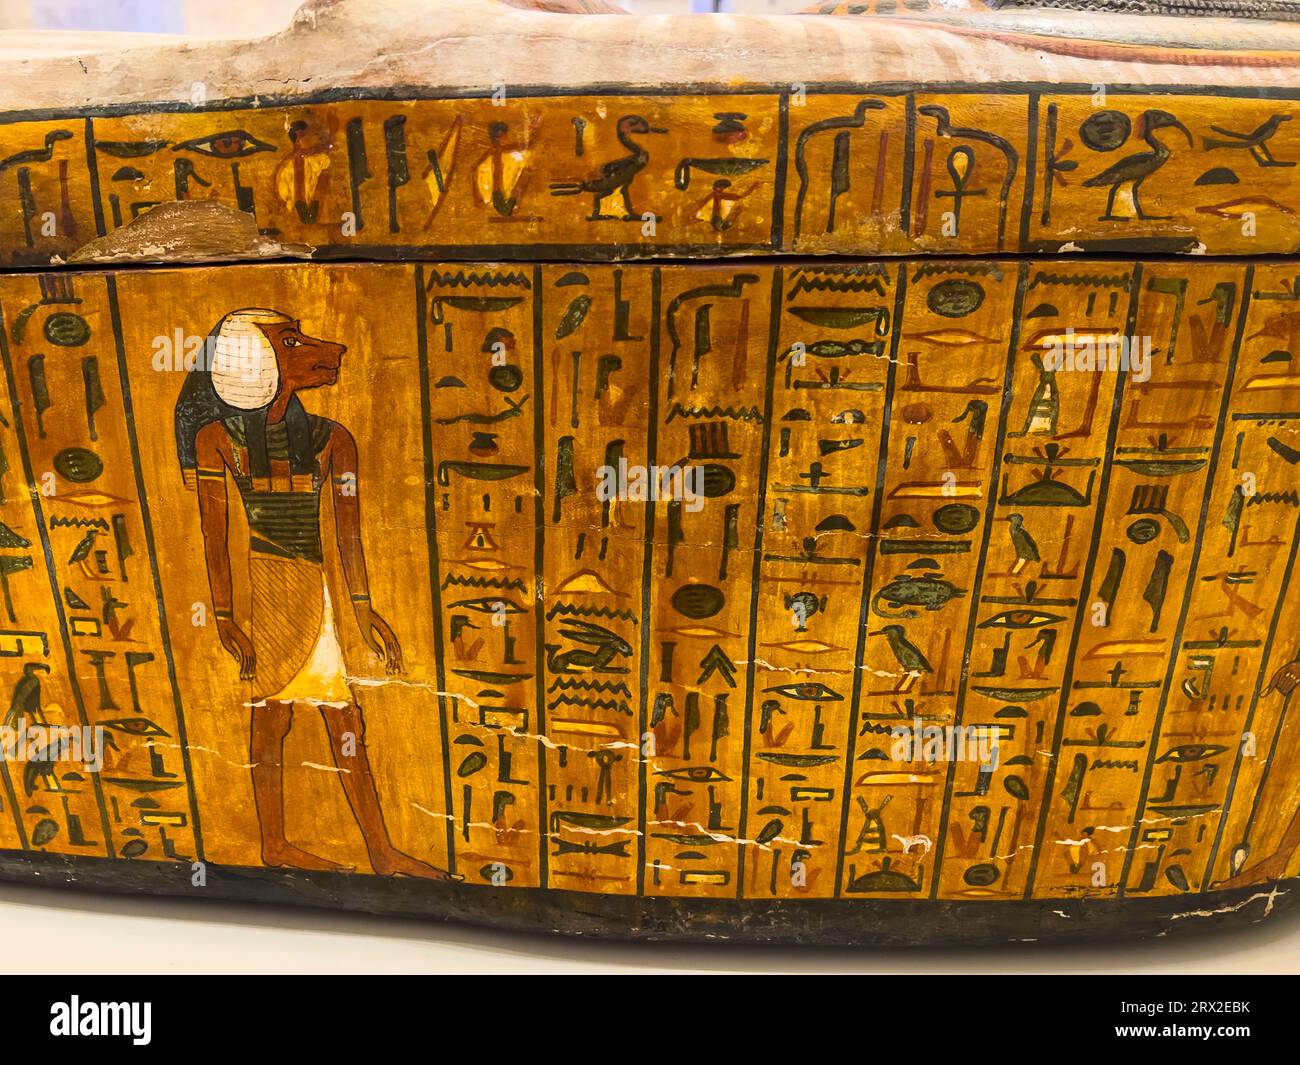 View of the remains of an ancient Egyptian Sarcophagus on display at the Egyptian Museum, Cairo, Egypt, North Africa, Africa Stock Photo